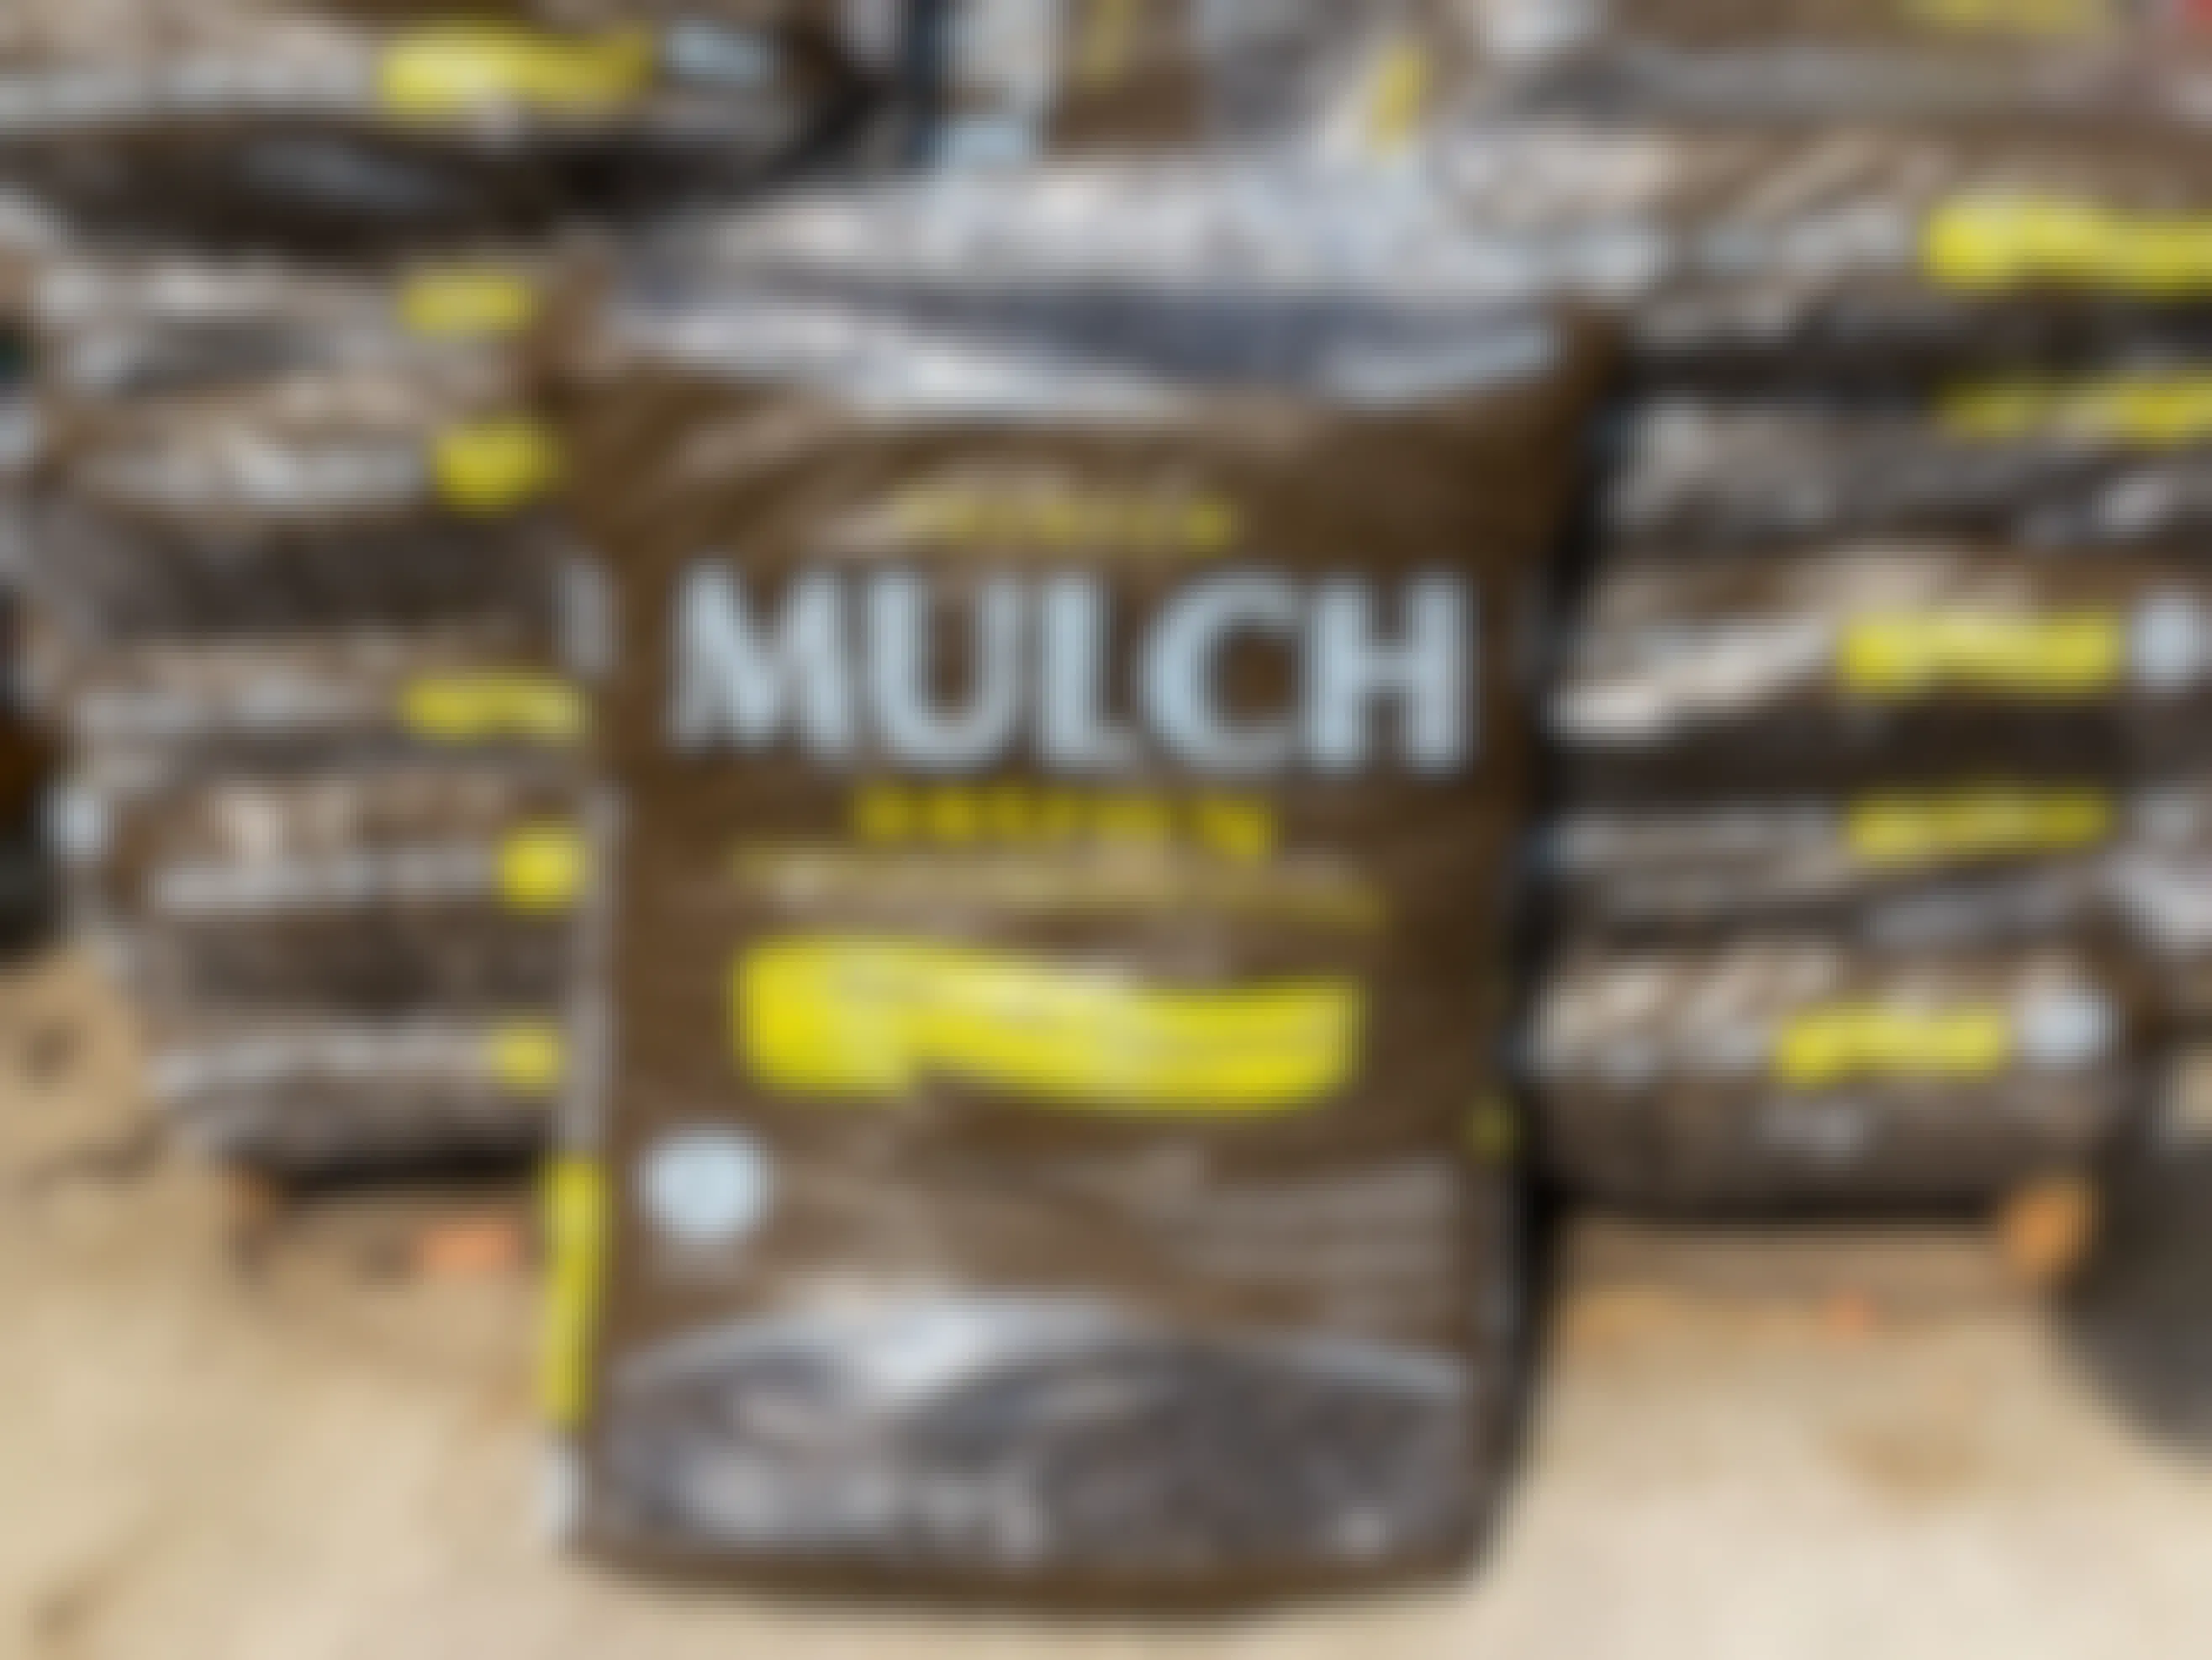 A bag of Premium brown mulch sitting on the ground in front of a pallet full of more bags of mulch in the Lowe's Garden Center